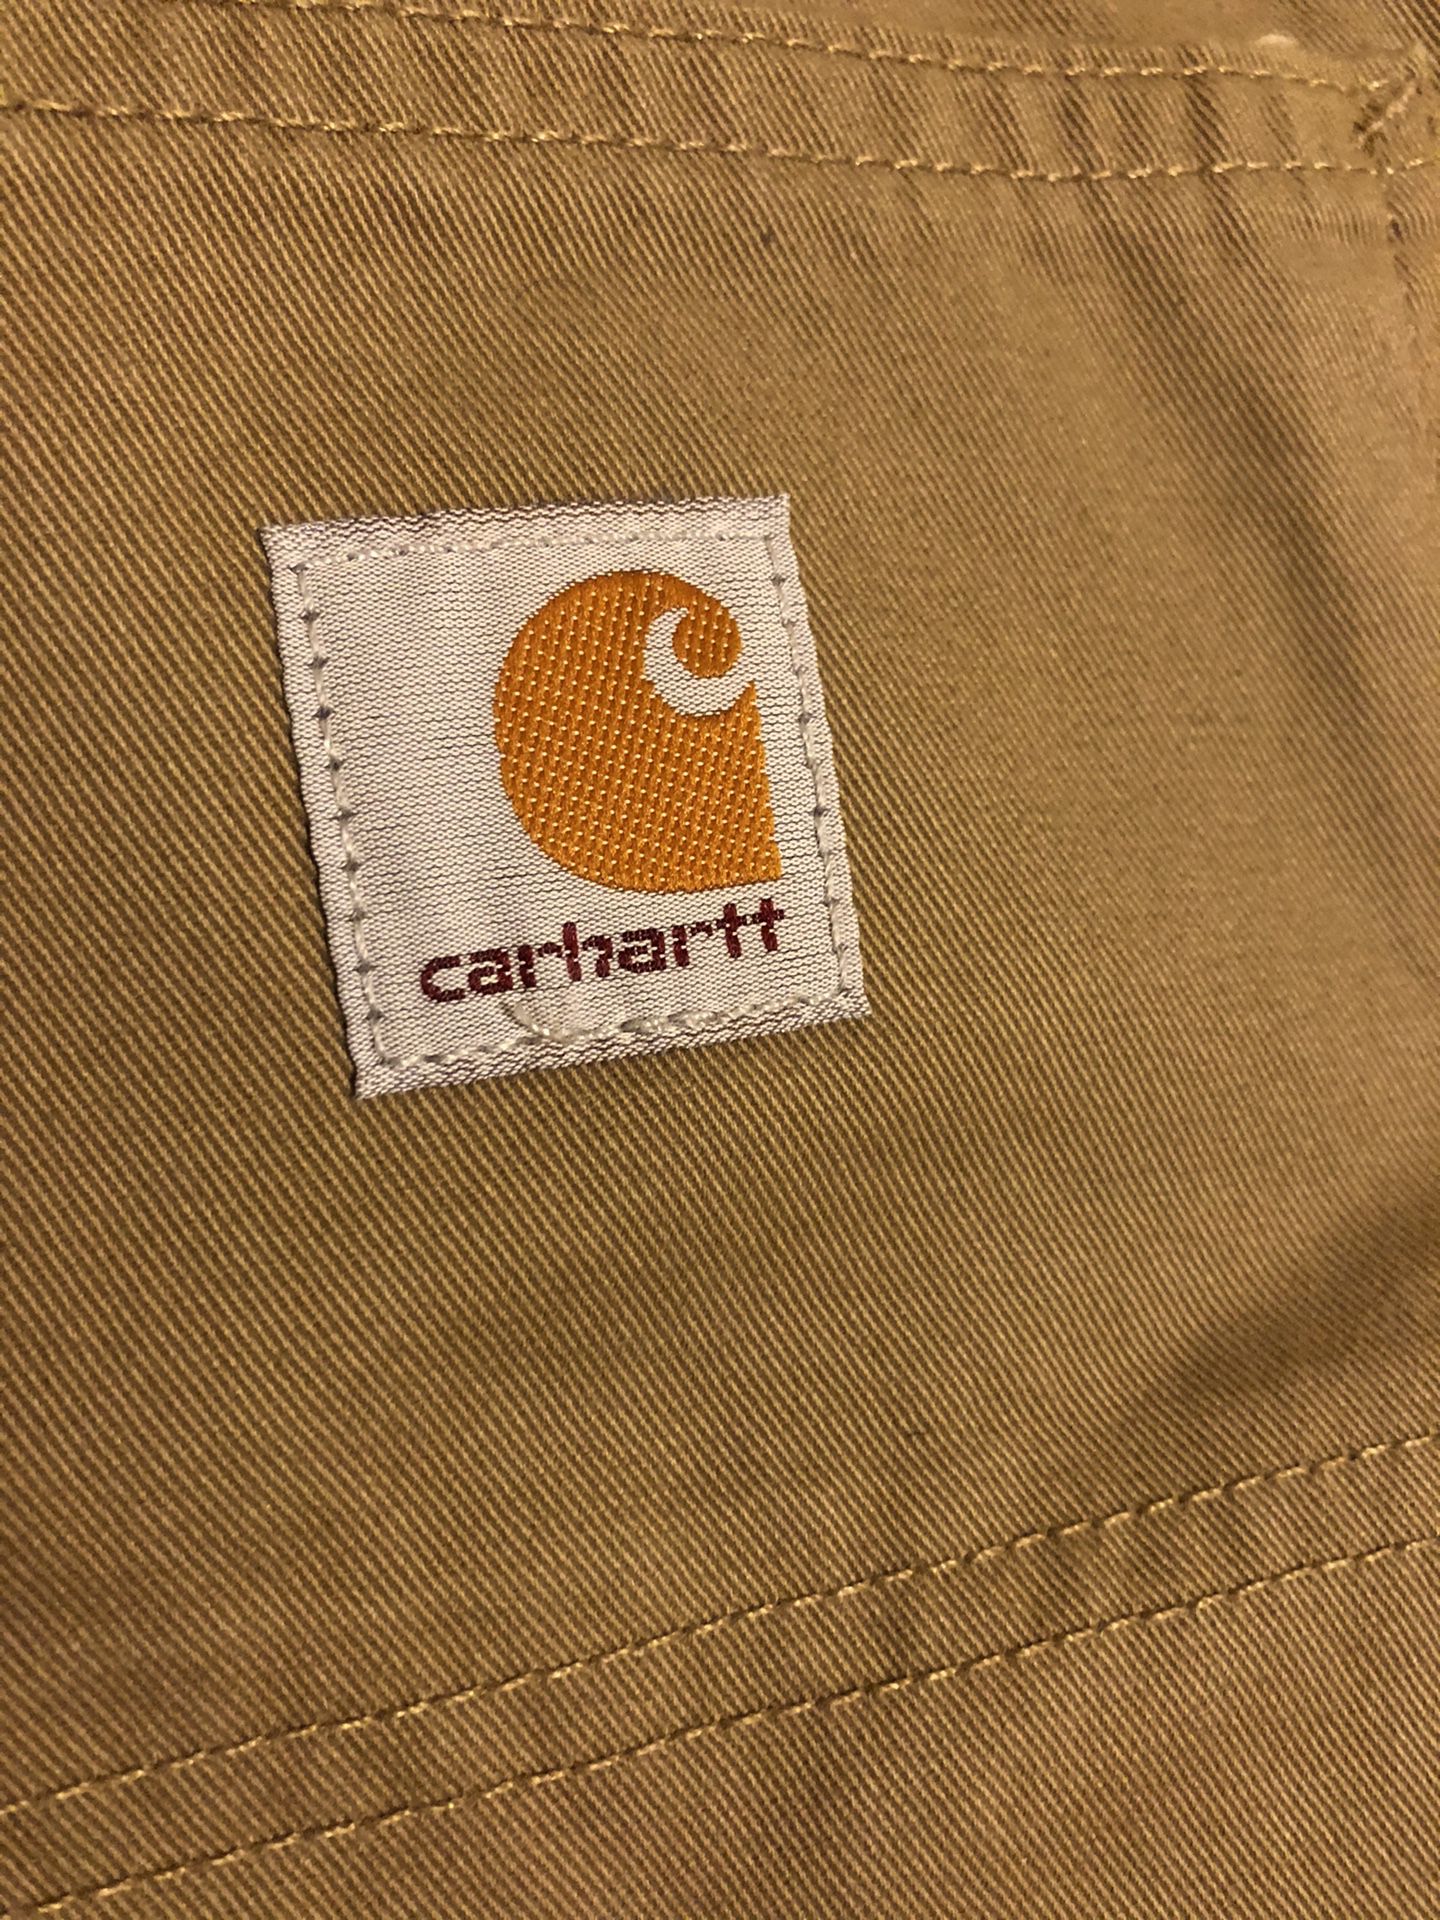 Brand new Carhartt relaxed fit twill dungarees